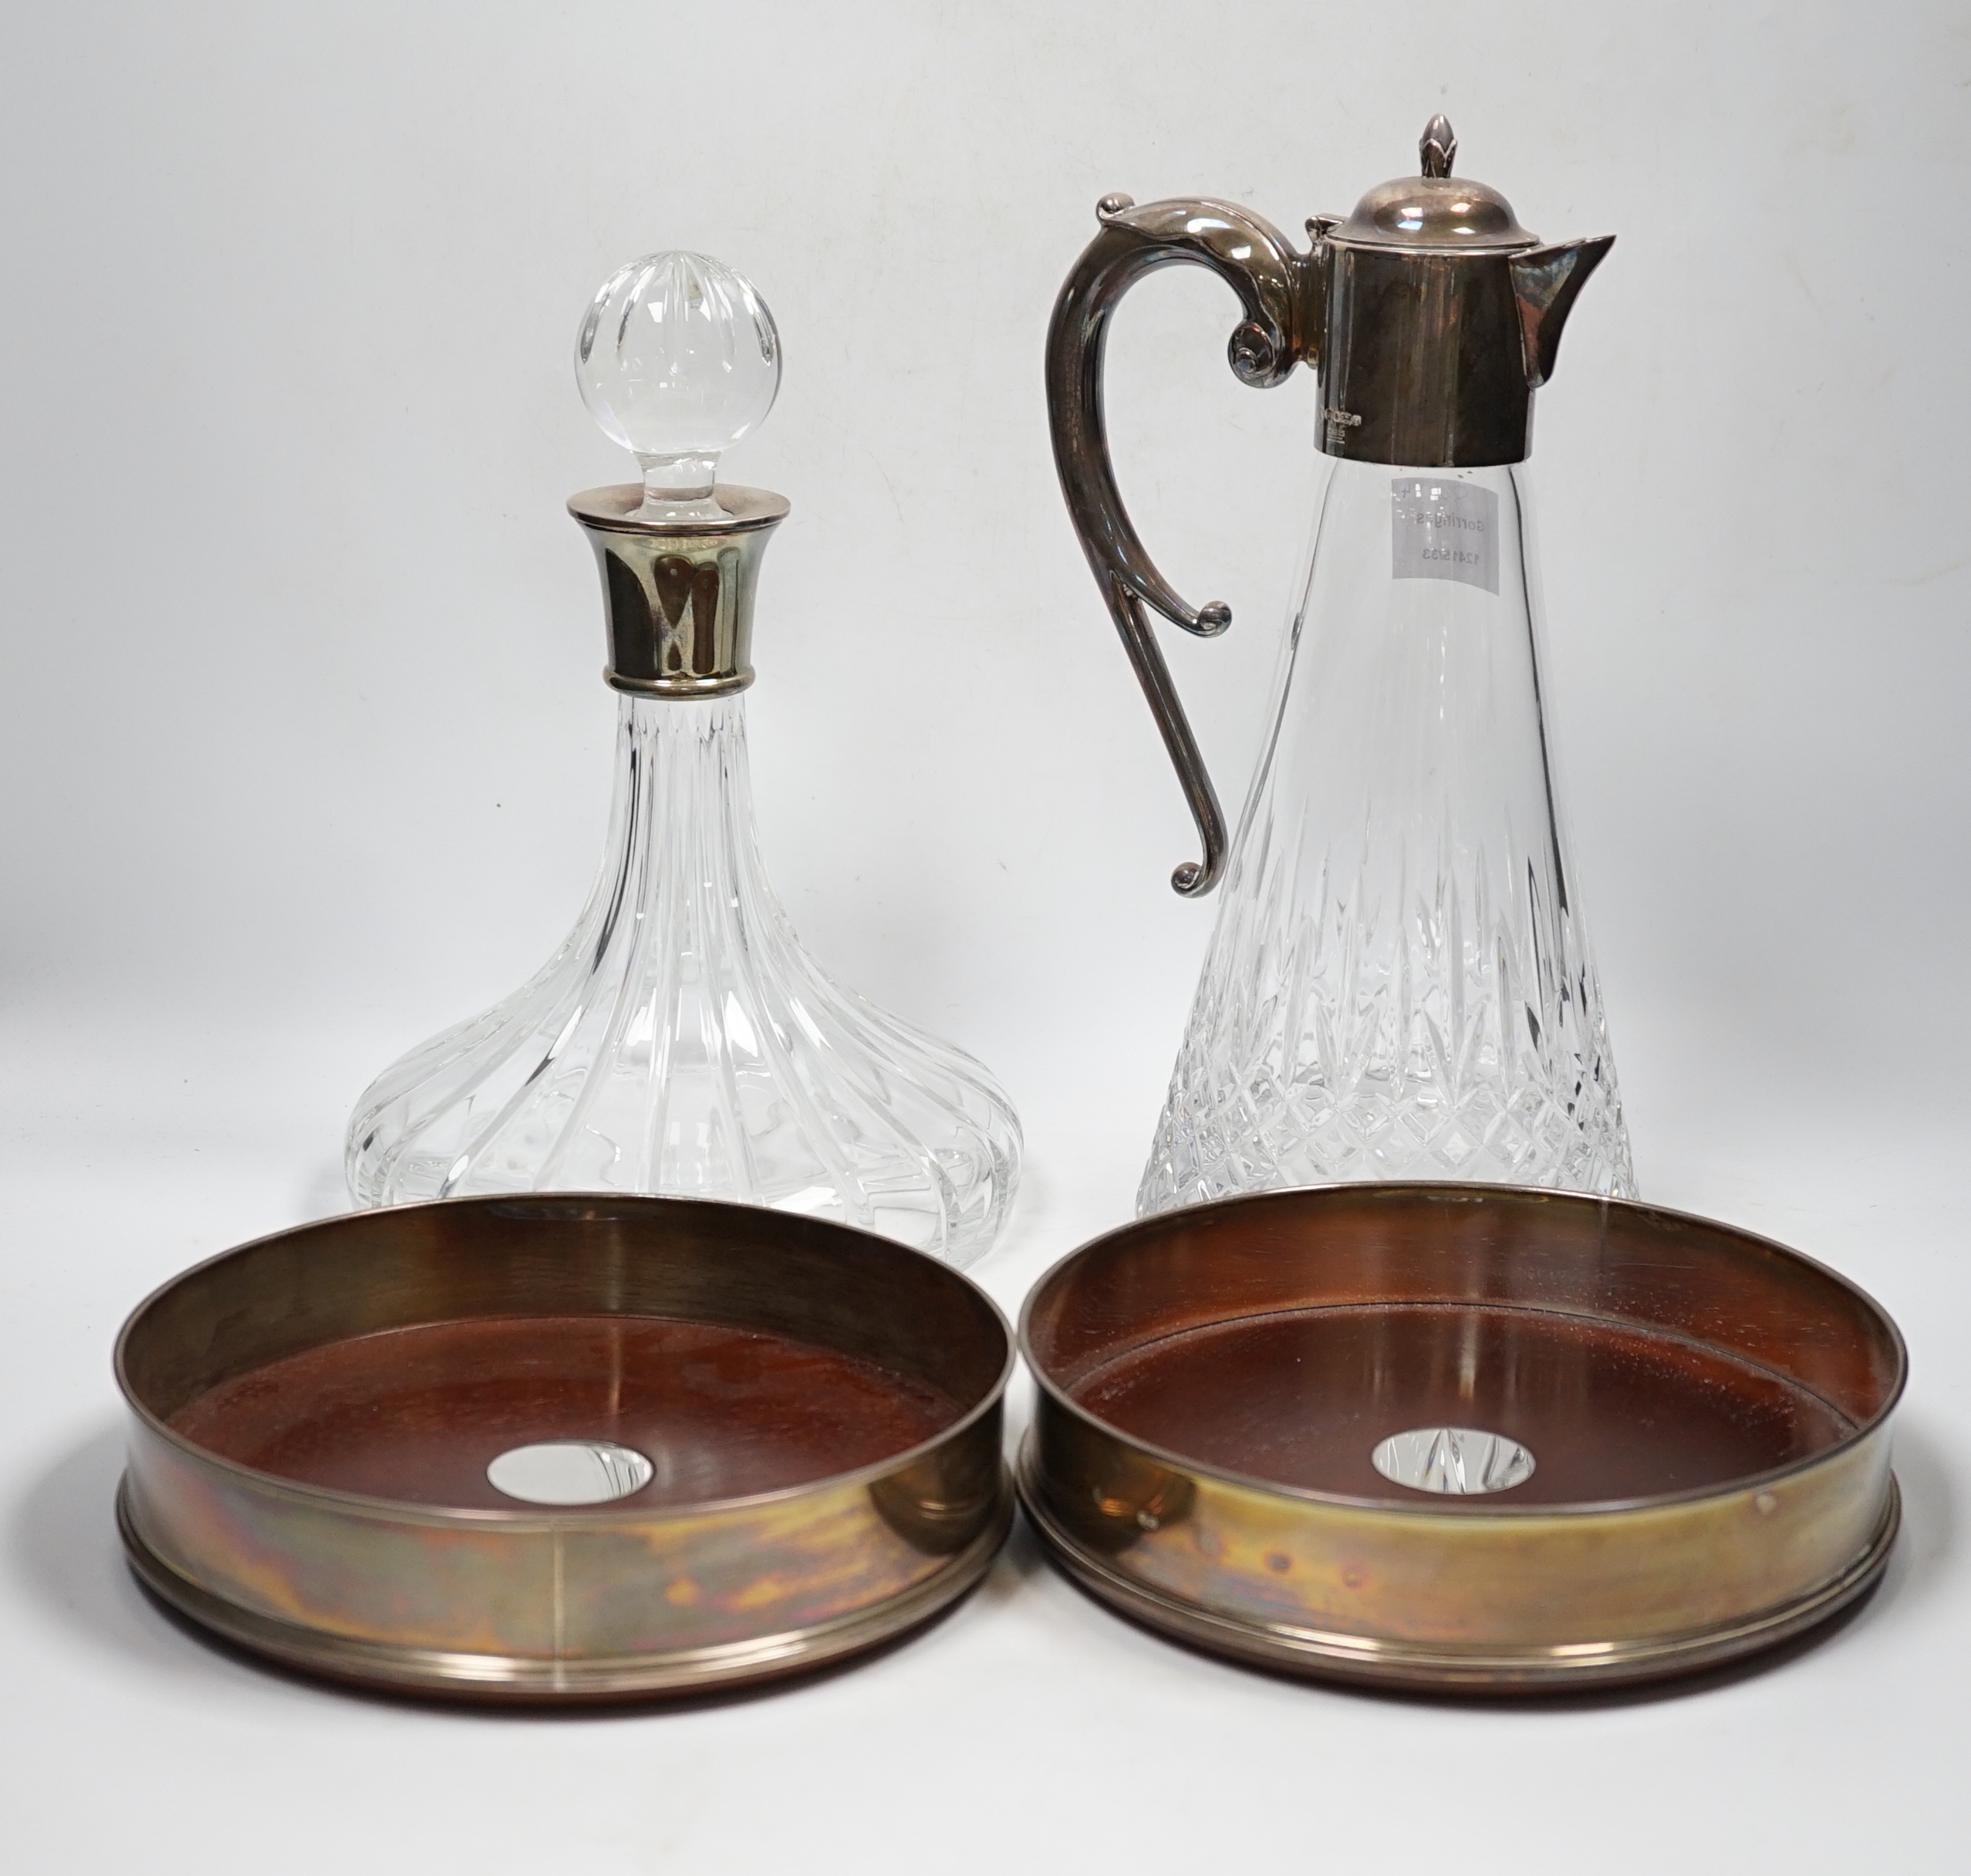 A Carr's of Sheffield modern silver mounted cut glass ship's decanter and stopper with matching silver mounted decanter coaster, Sheffield, 2007/8, one other similar decanter coaster and a silver mounted glass claret jug